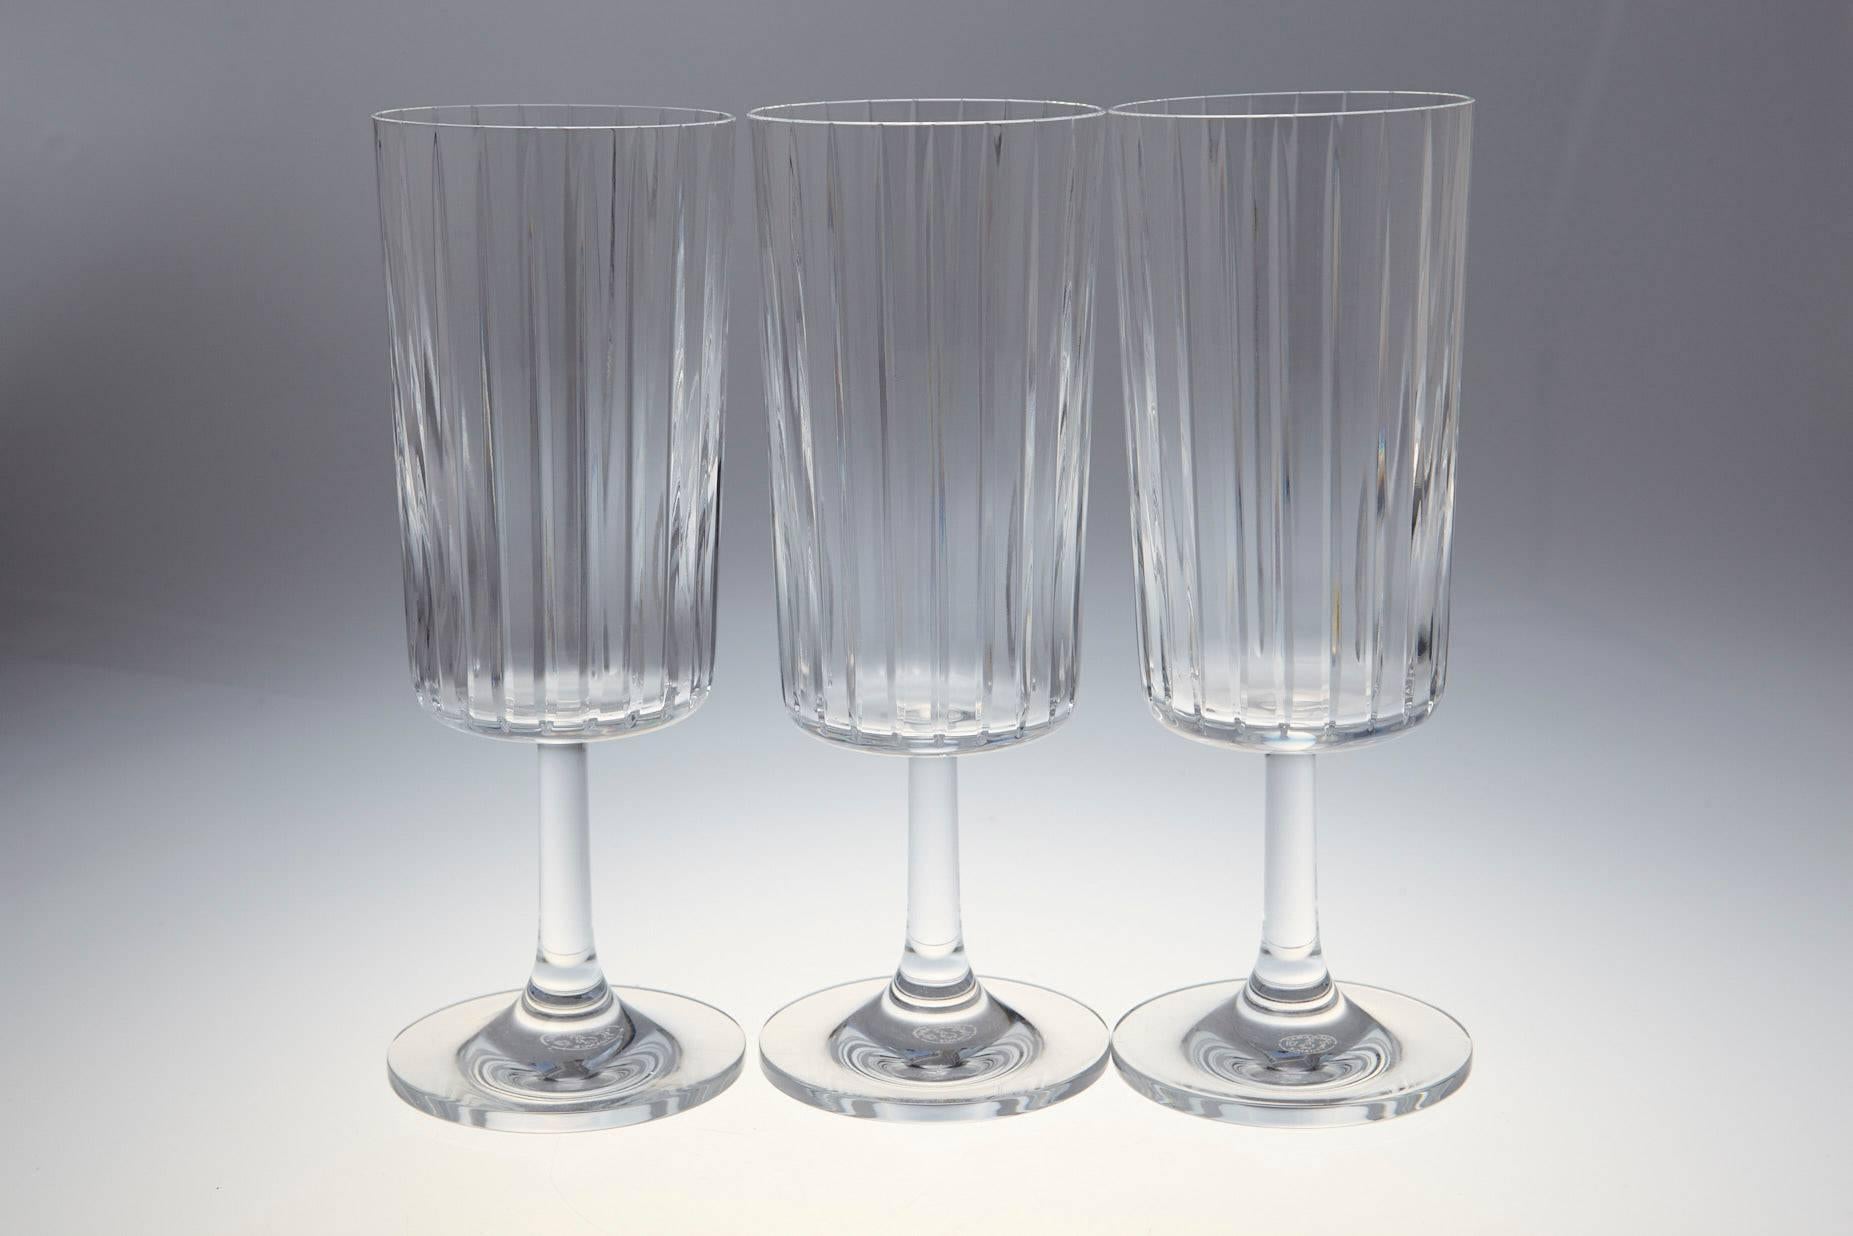 The timeless and very graphic Baccarat Harmonie bar pattern was introduced in 1975 and is until today Baccarats top selling bar pattern of all time.
Consecutive vertical cuts from the top of the rim to the base emphasize the vertical graphical